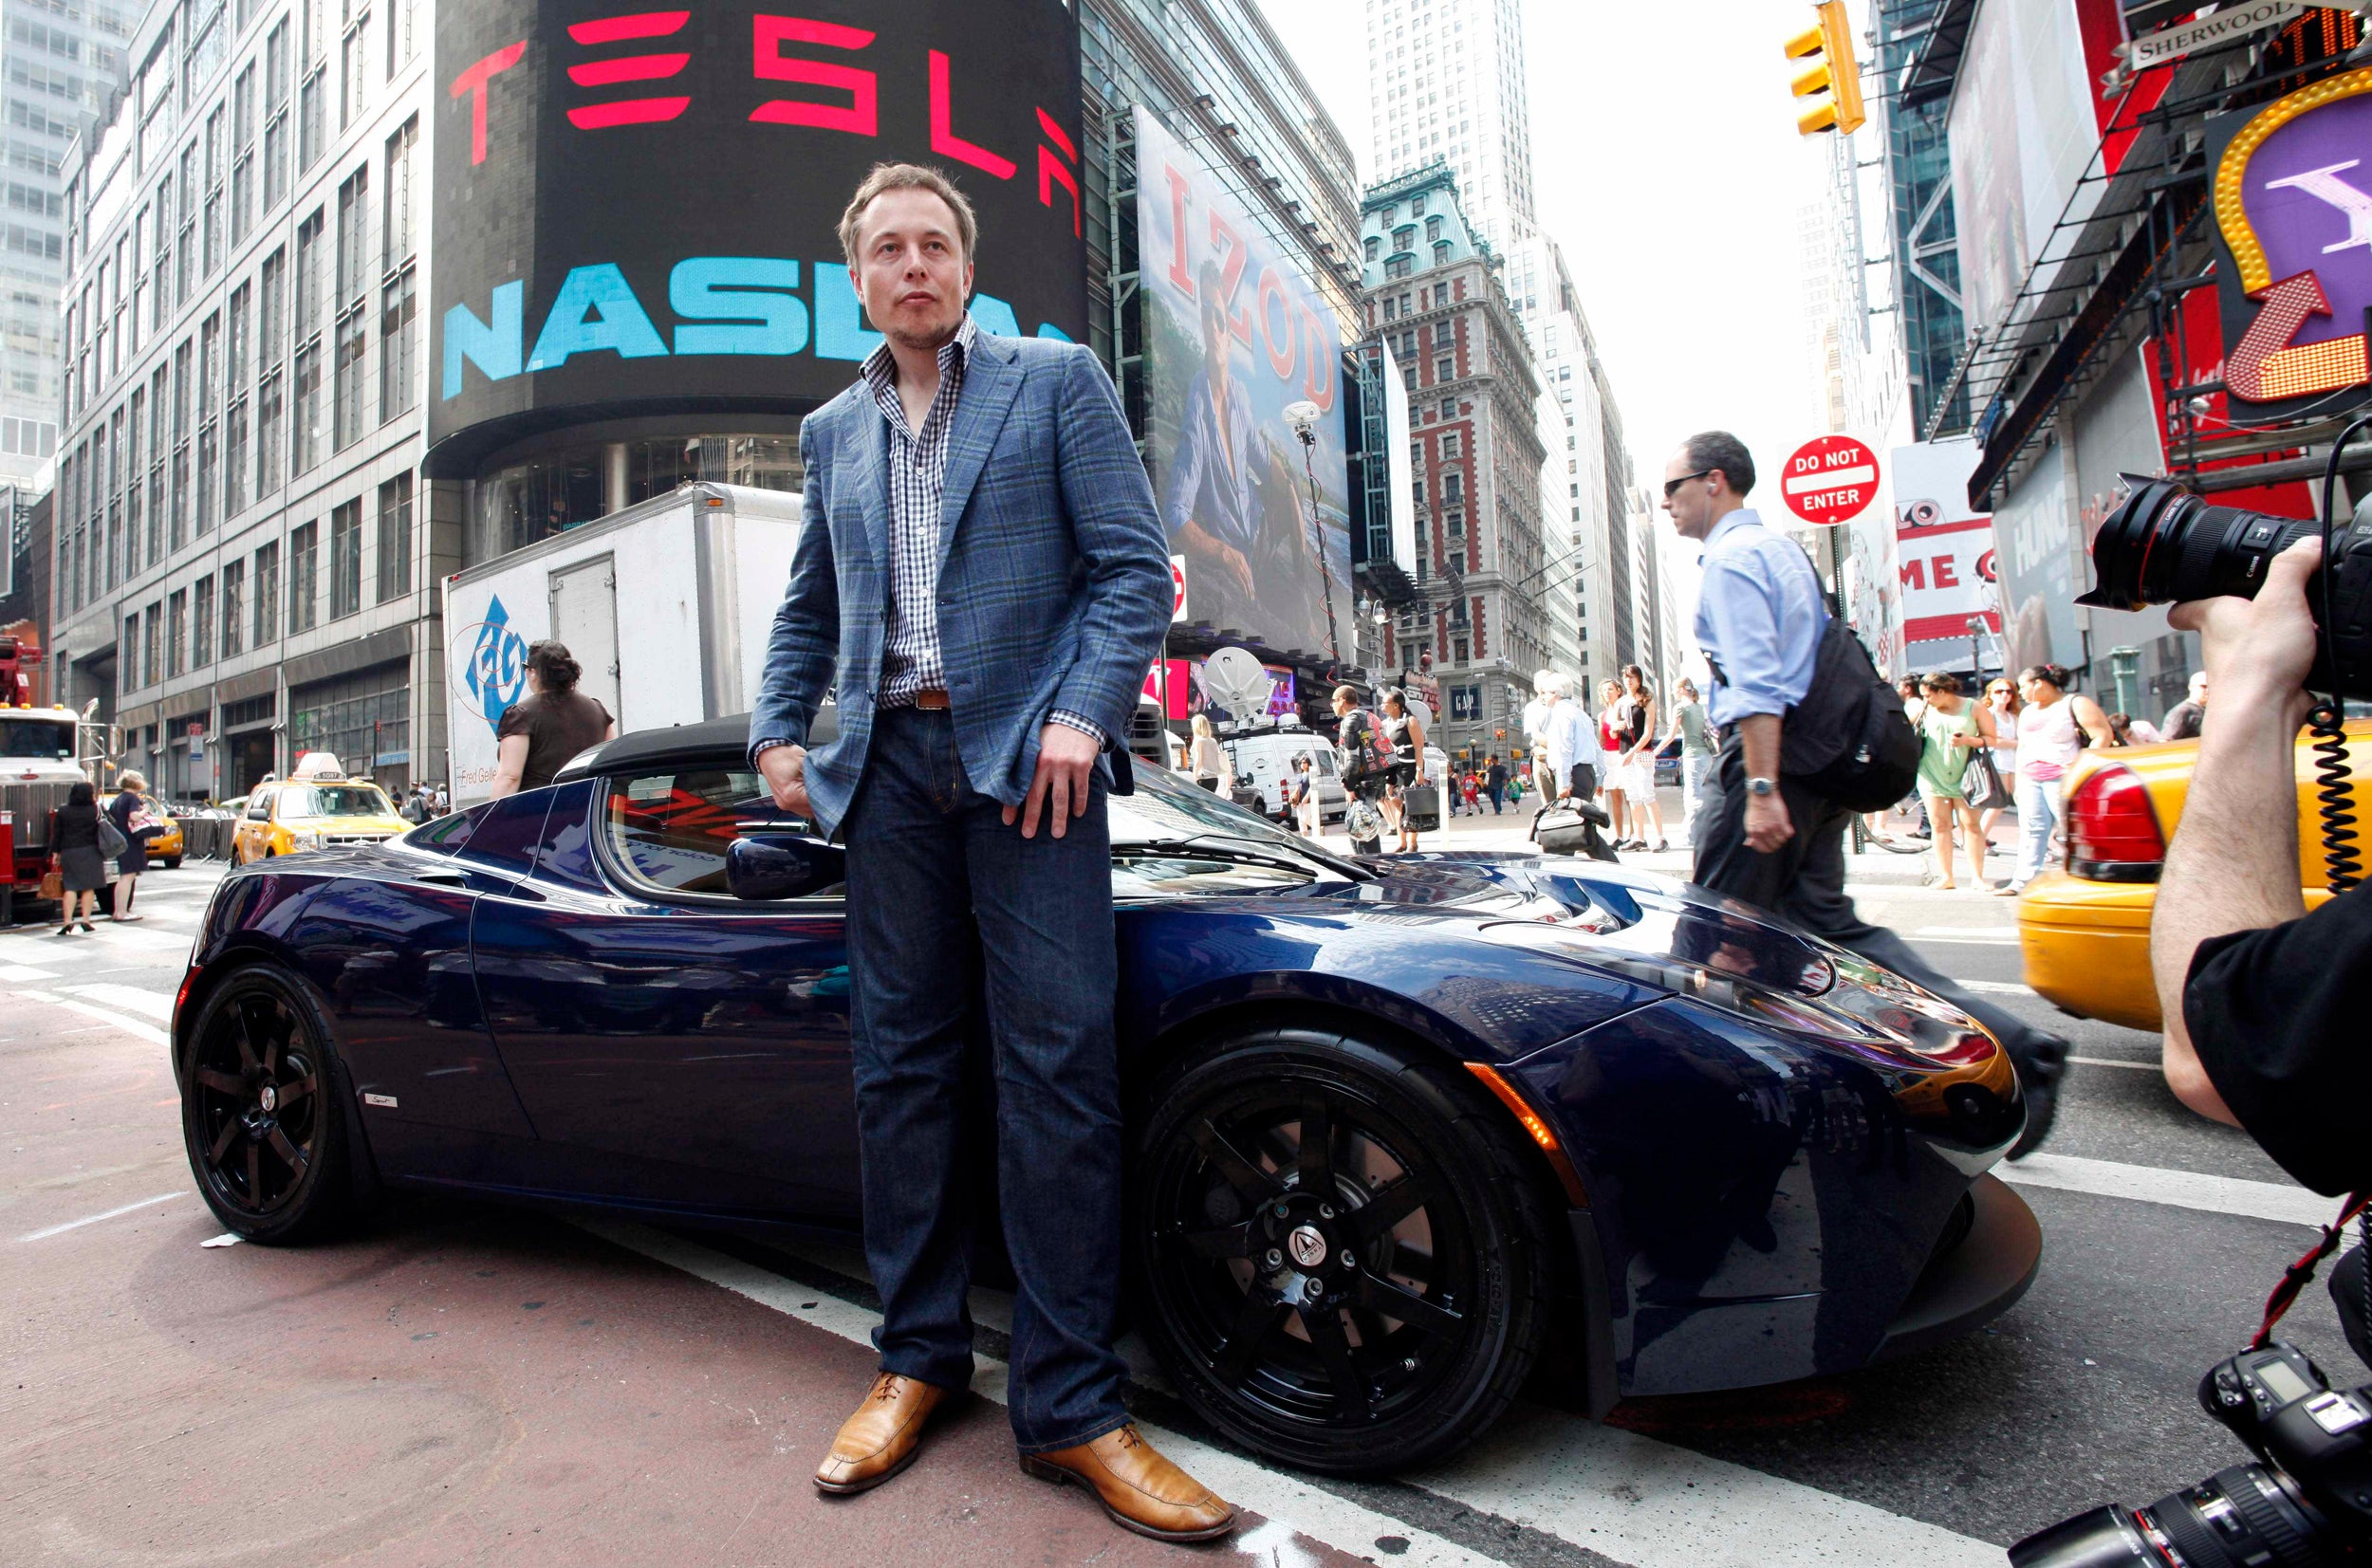 Elon Musk Went All-In on Tesla (TSLA) 12 Years Ago, Taking it from an Almost Bankrupt Startup to the Most Valuable Automaker